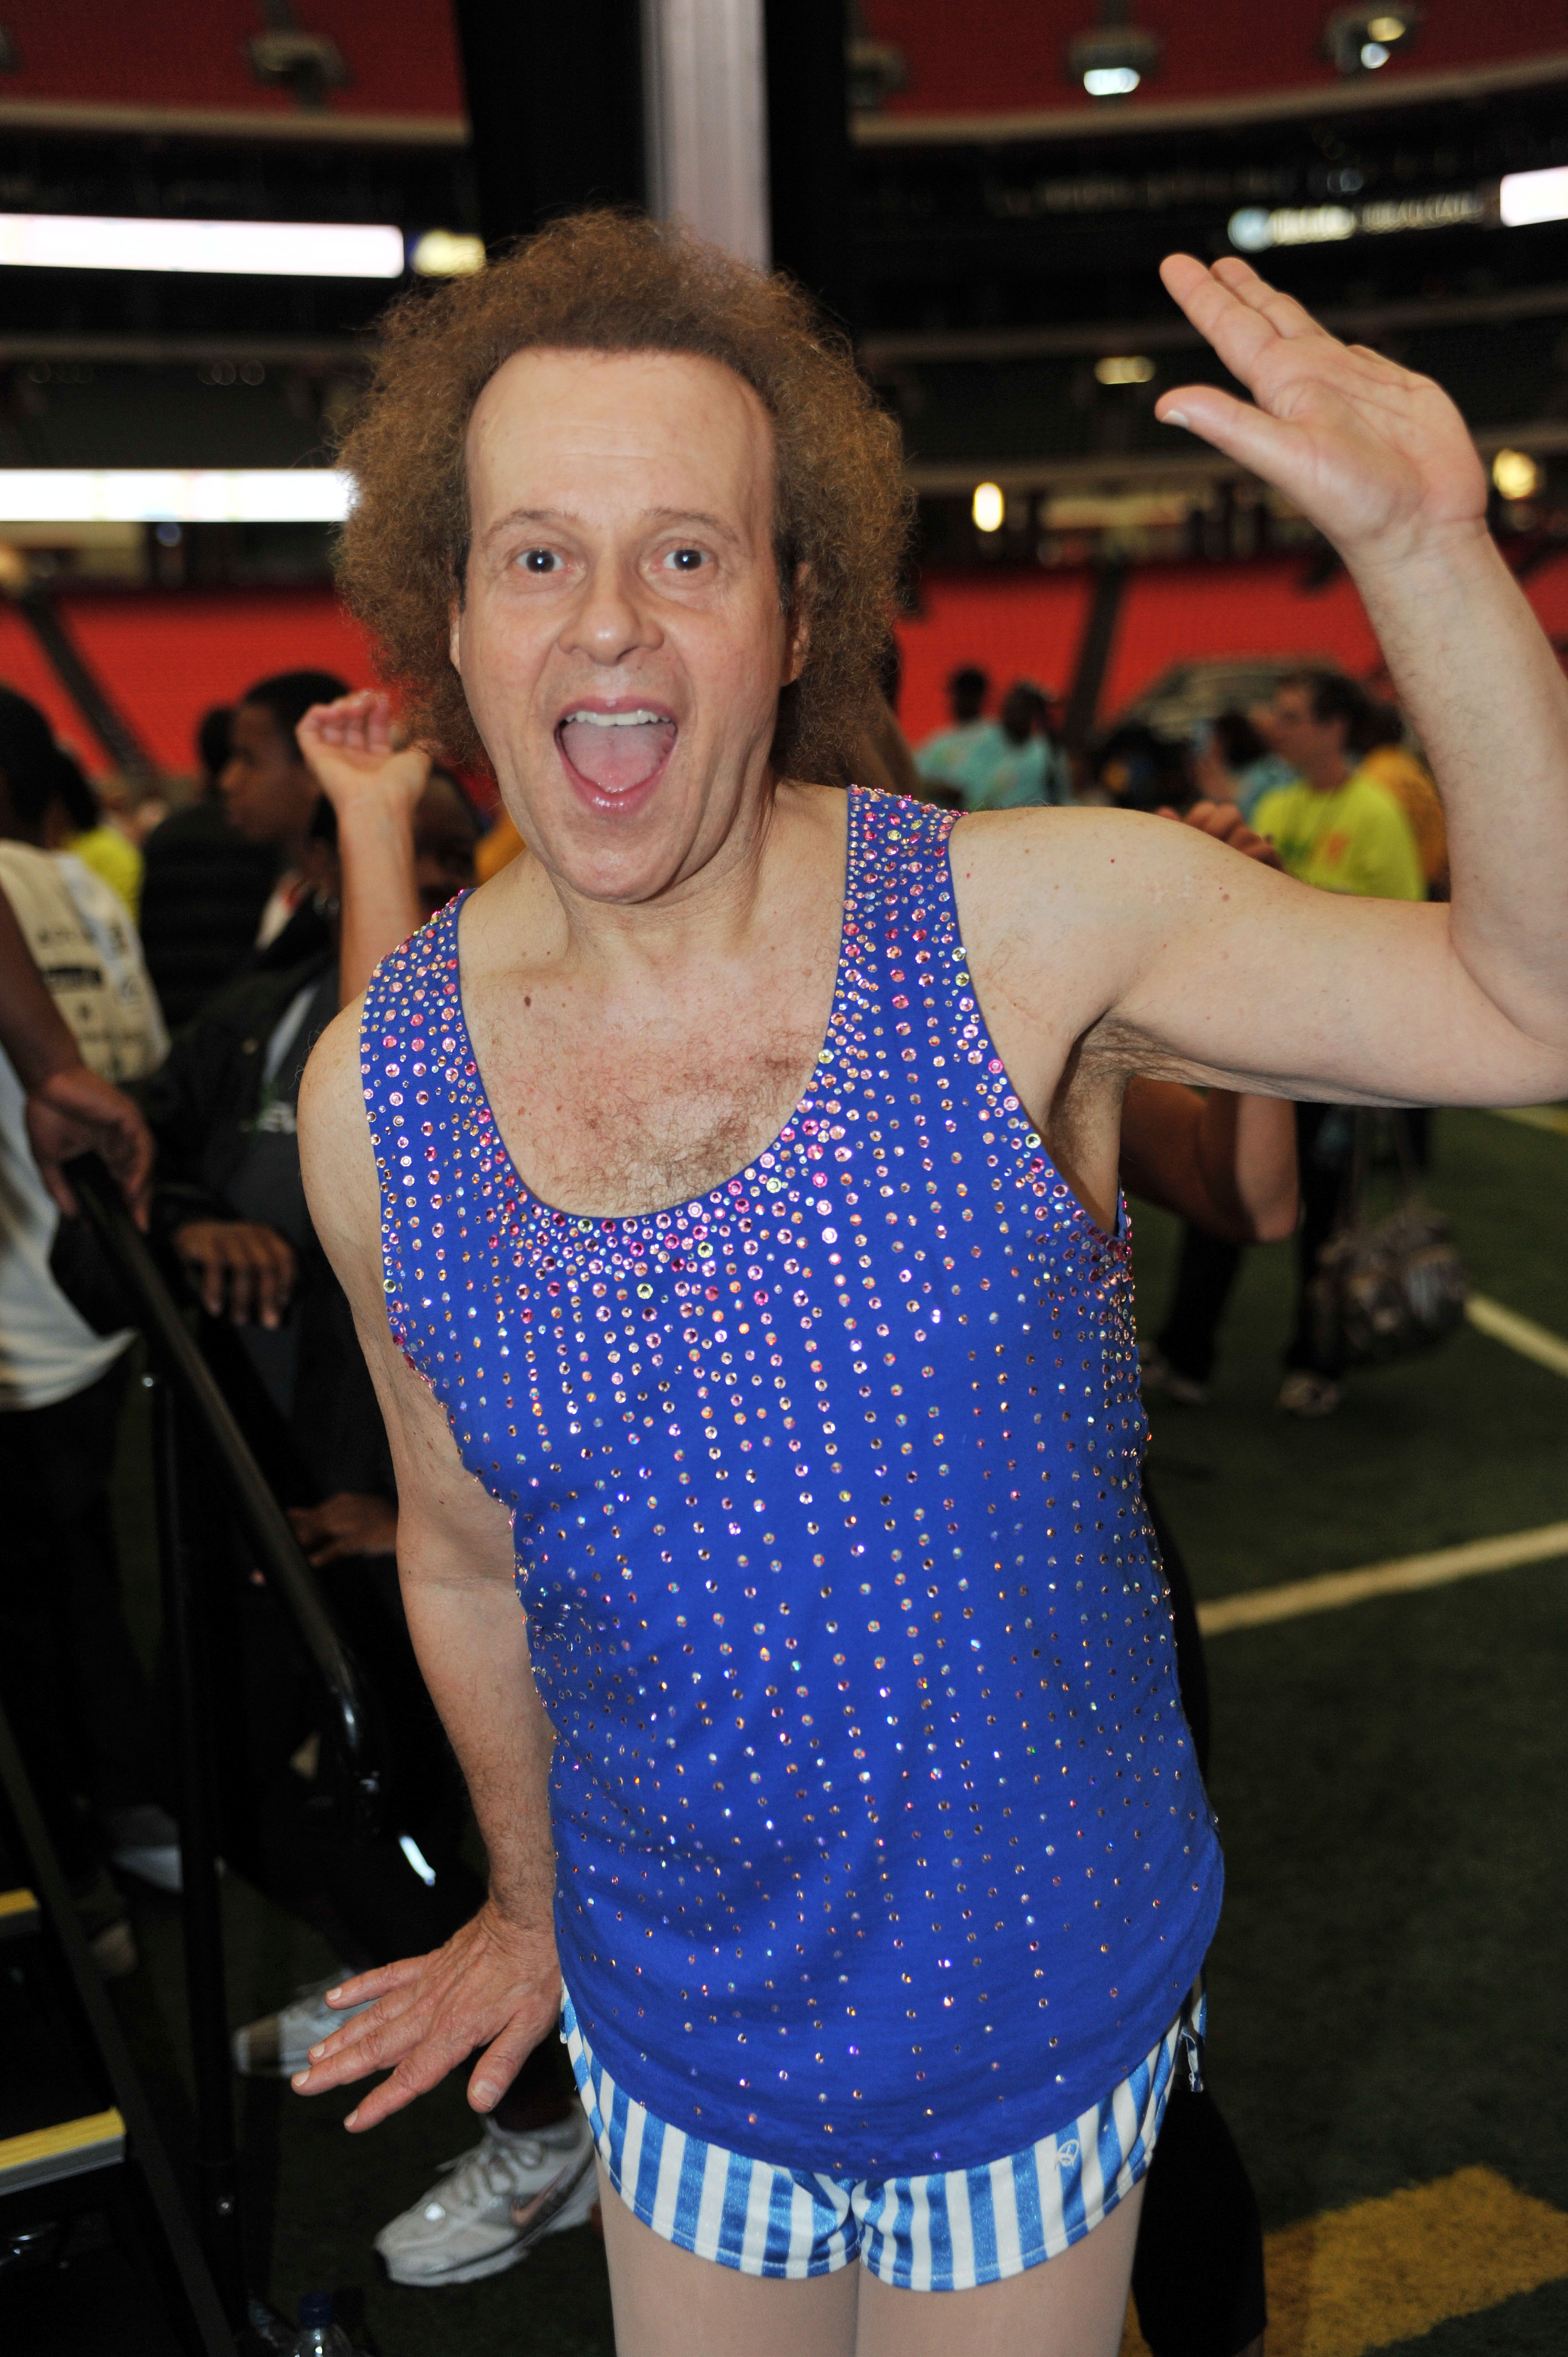 Richard Simmons attends the 2010 World Fitness Day at the Georgia Dome on May 1, 2010, in Atlanta, Georgia. | Source: Getty Images